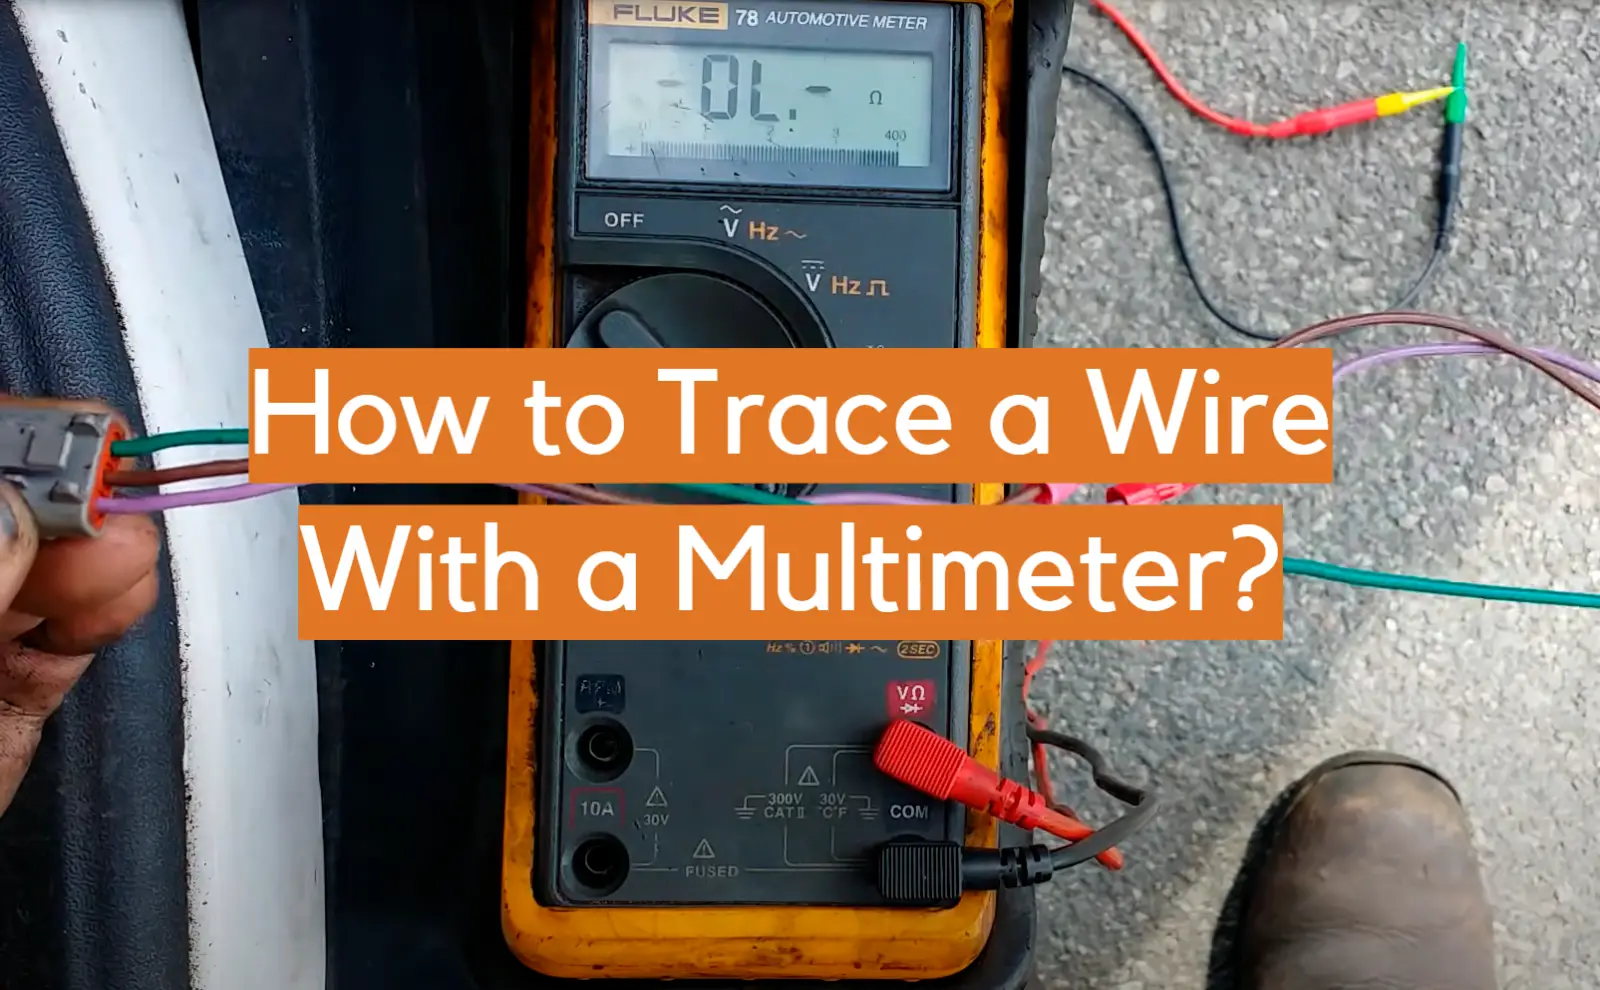 How to Trace a Wire With a Multimeter?